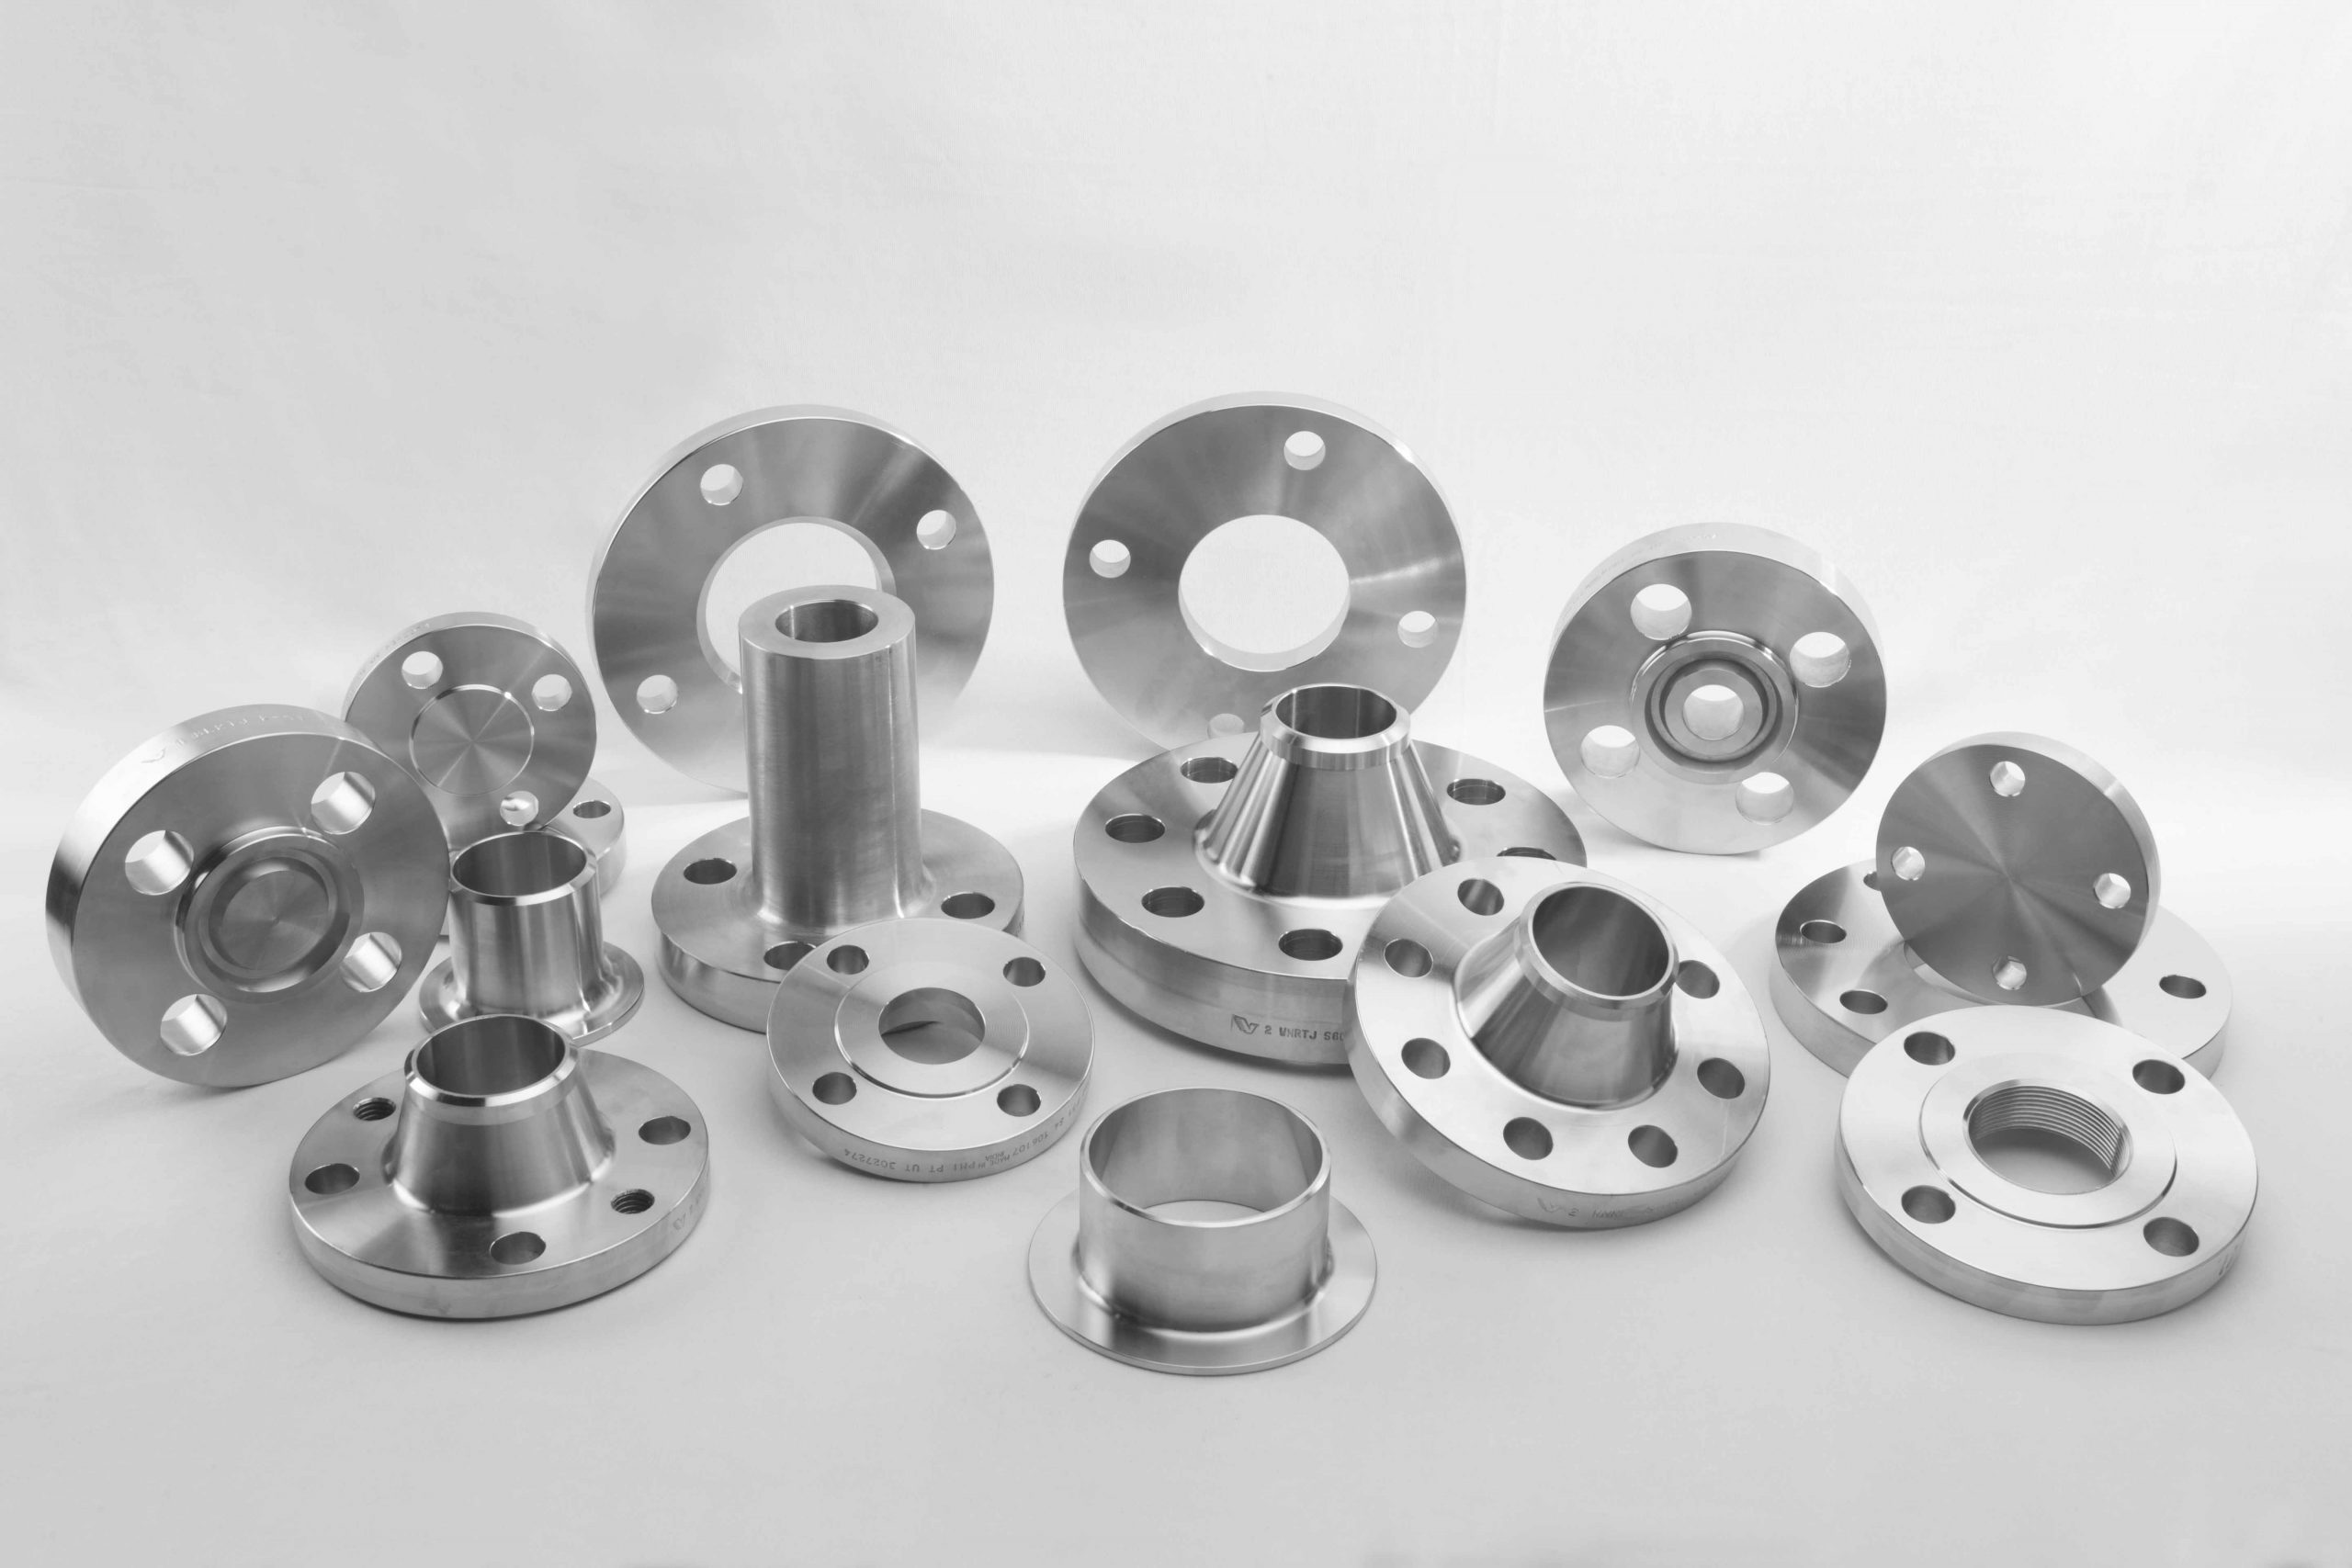 Flanges Market to Grow at a CAGR of 5.0% from 2022 to 2031: Allied Market Research